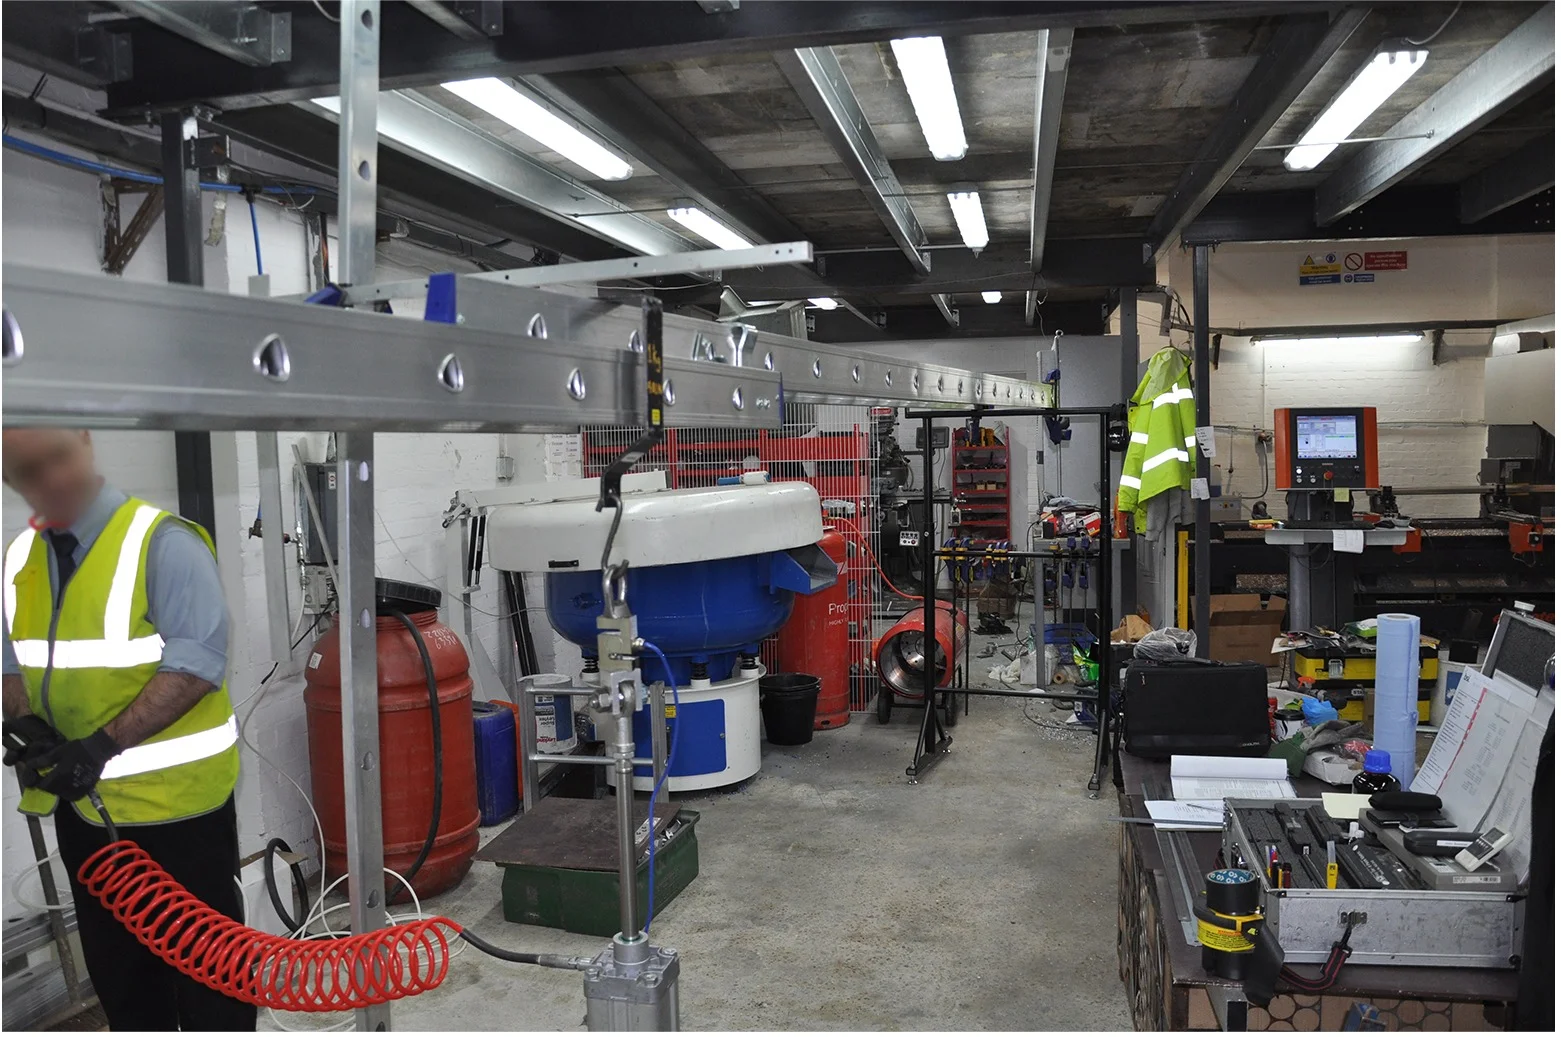 triple heavy duty extension ladders being tested for industry